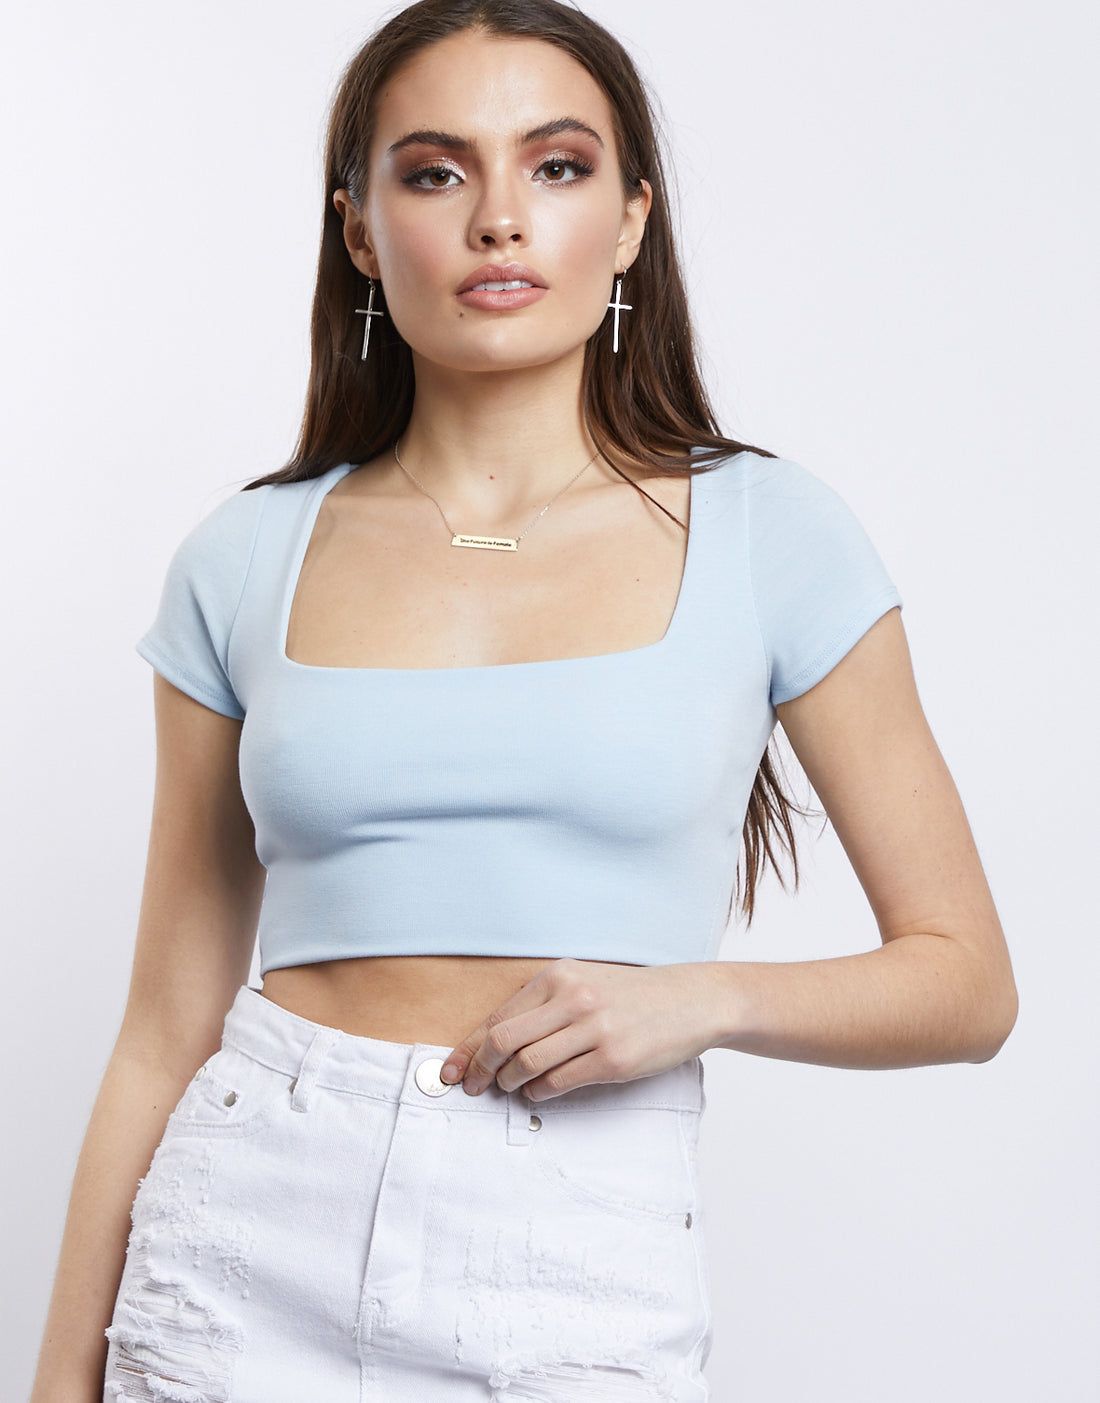 Alissa Square Neck Crop Top Tops Baby Blue Small -2020AVE